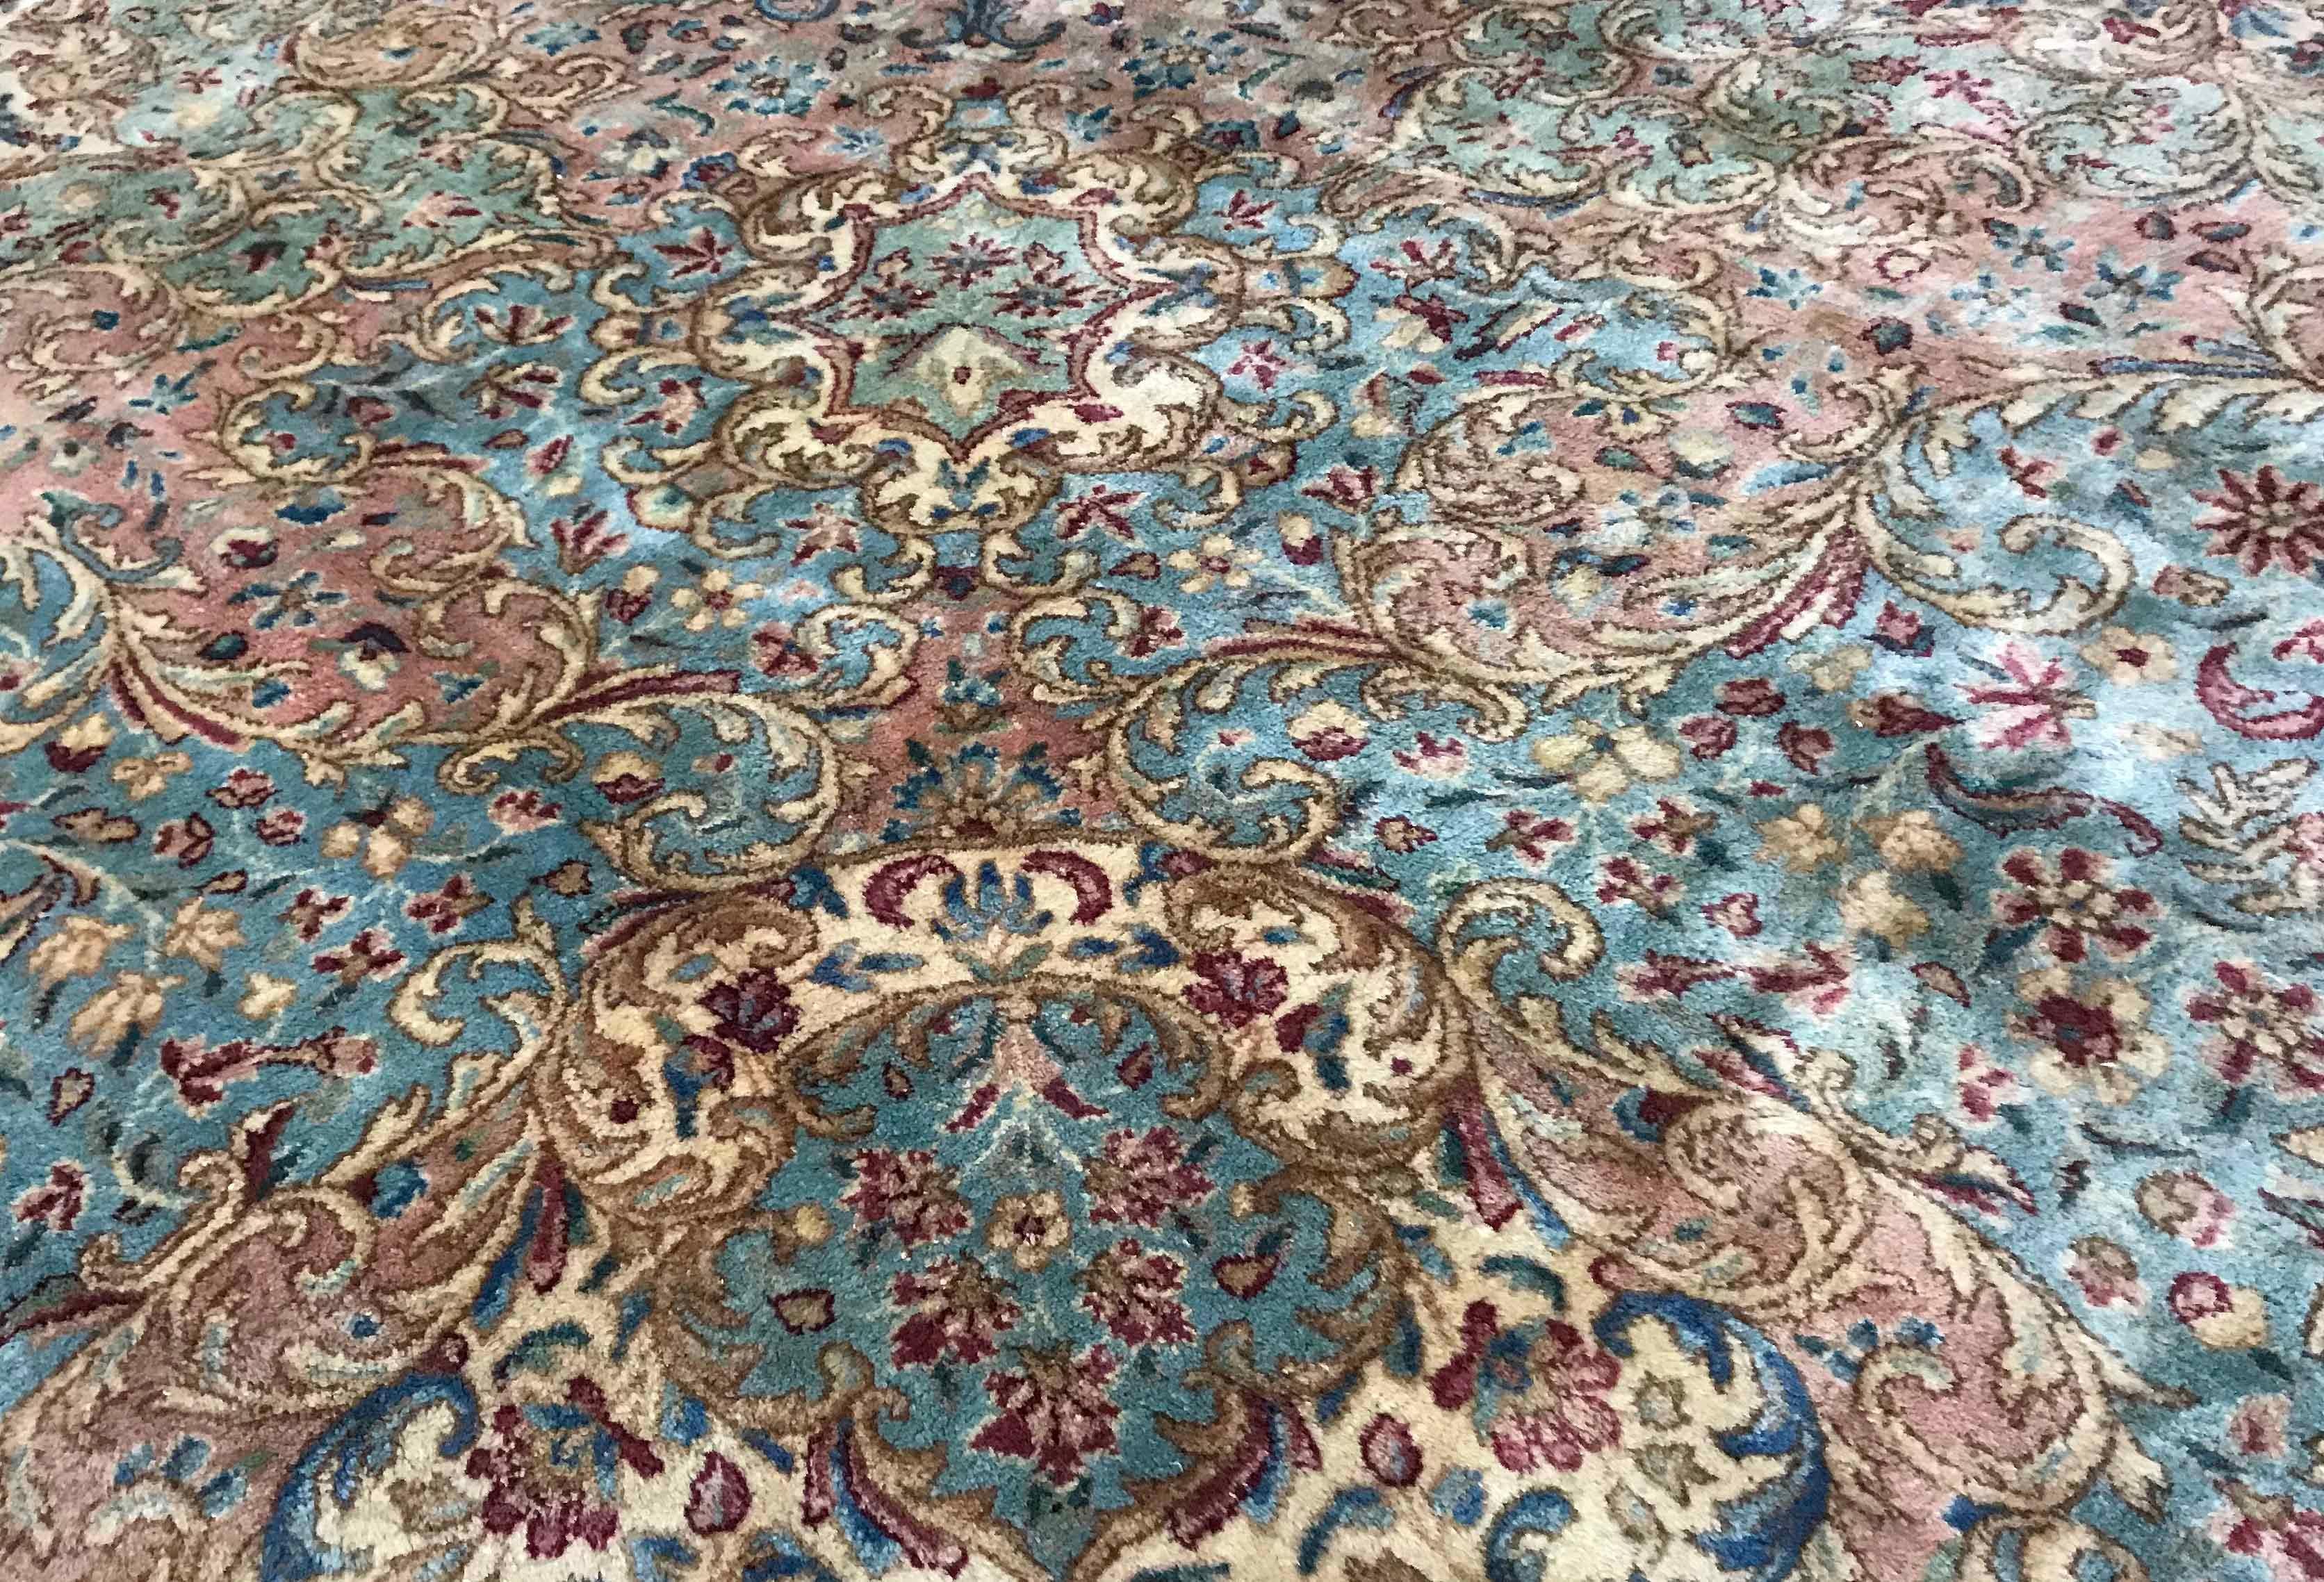 Vintage Persian Kerman, circa 1940. This large rug has a wonderfully soft central filed, filled with floral designs surrounding a central medallion in soft blues that extends into the border to create a relaxed and gentle feel to this 1940s vintage